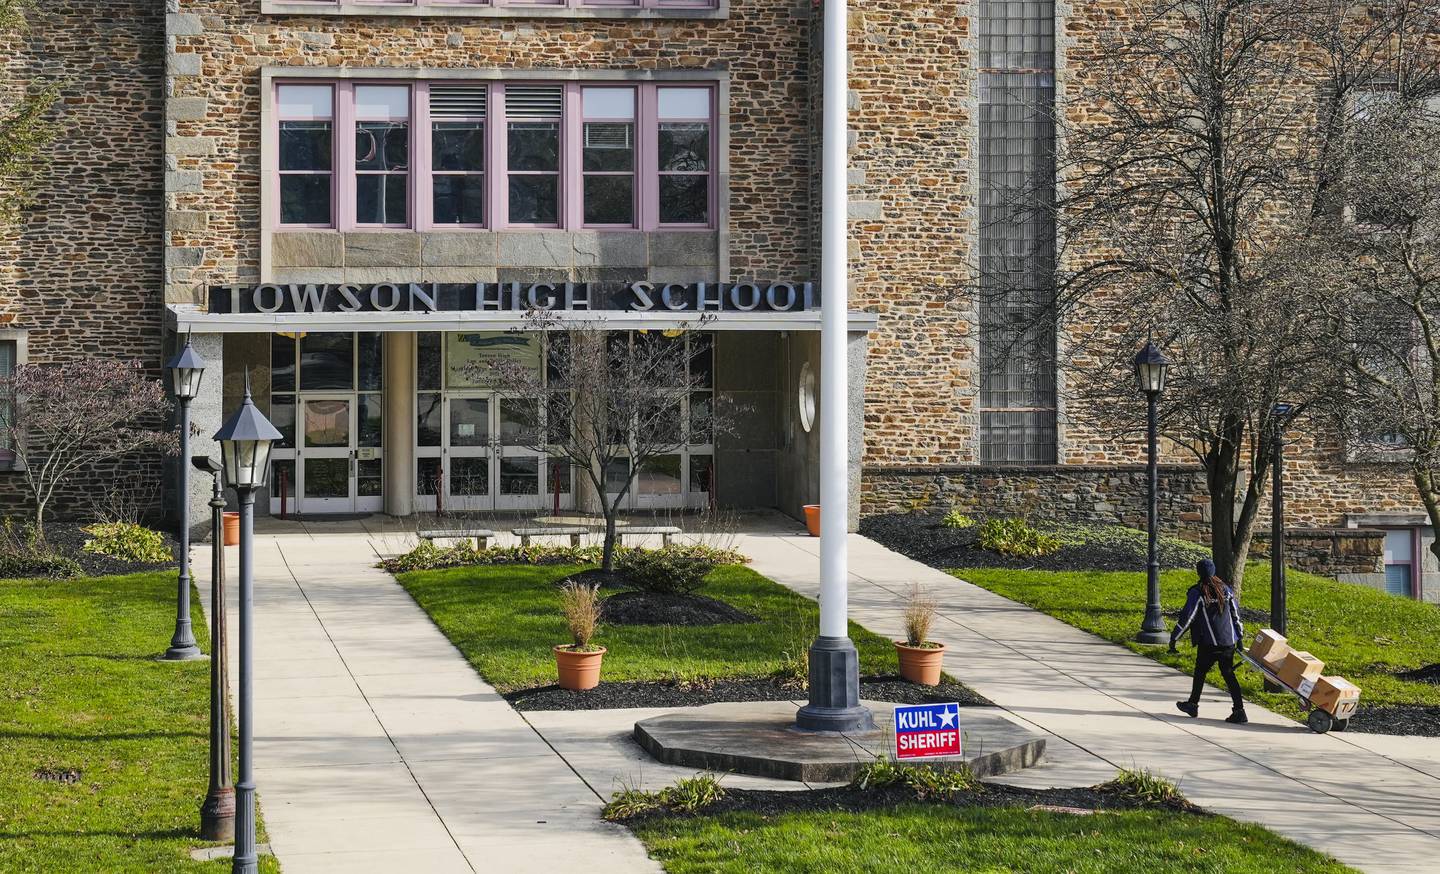 Towson High School, in Baltimore, Md., on November 18, 2022.